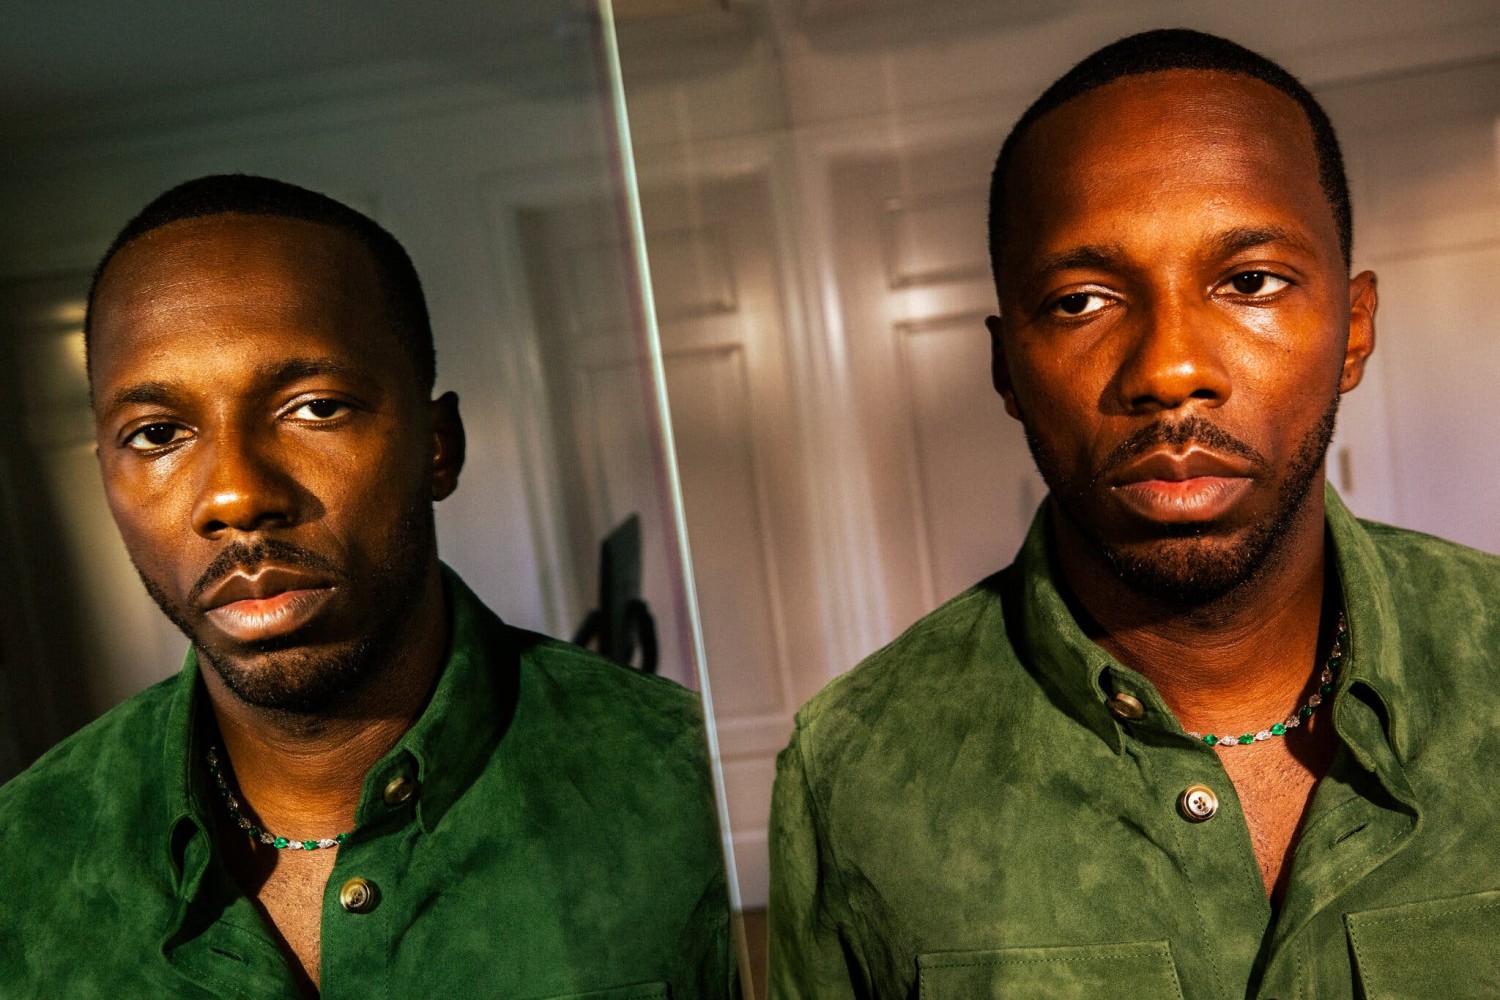 Rich Paul’s memoir, “Lucky Me,” comes out on Tuesday.Credit...Sinna Nasseri for The New York Times